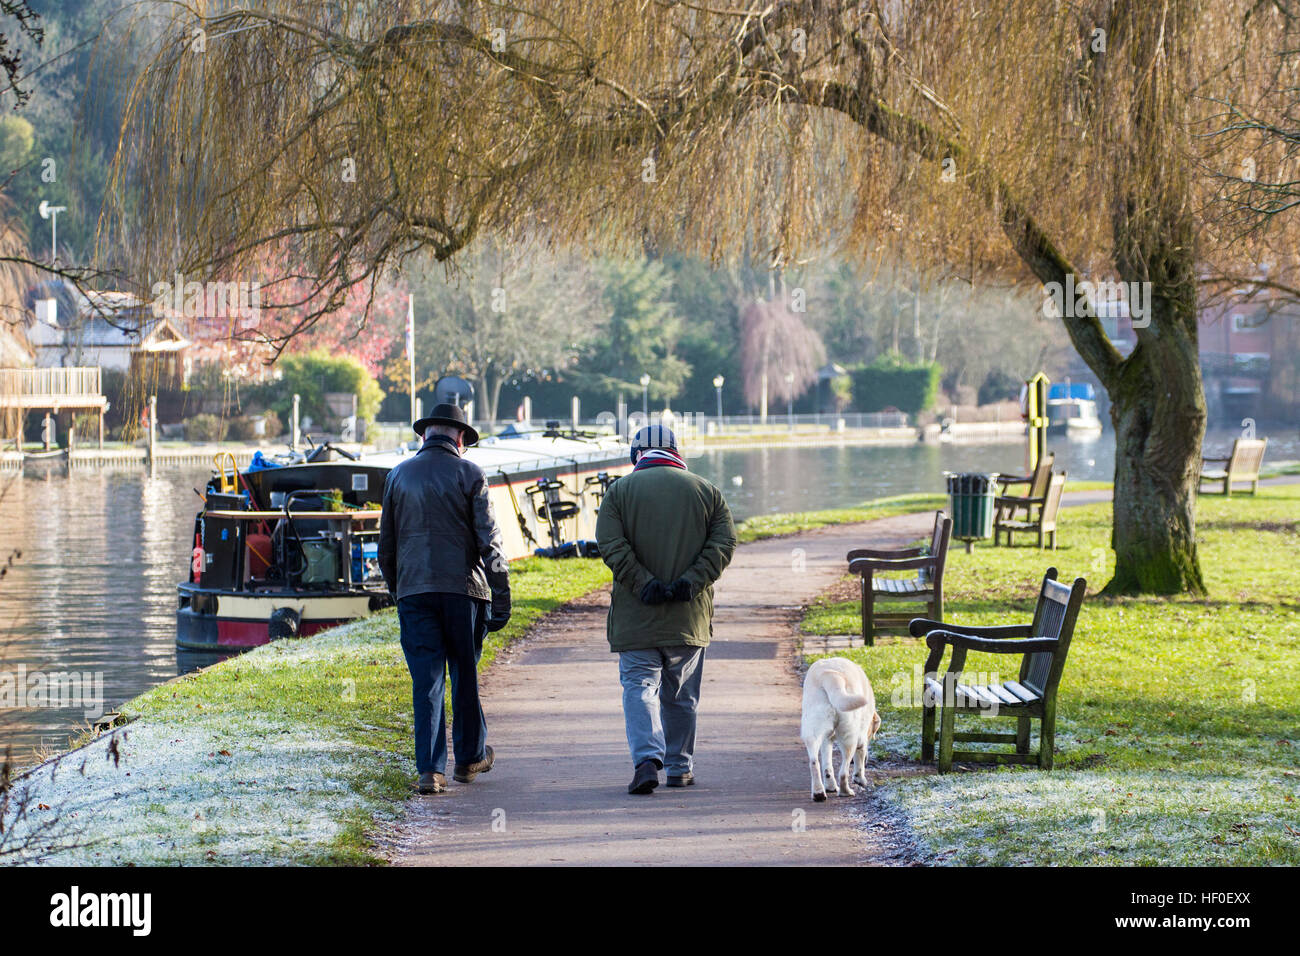 Henley-on-Thames, UK. 27th Dec, 2016. UK Weather: The December sunshine brought walkers and rowers alike to the river Thames at Henley. © Uwe Deffner/Alamy Live News Stock Photo